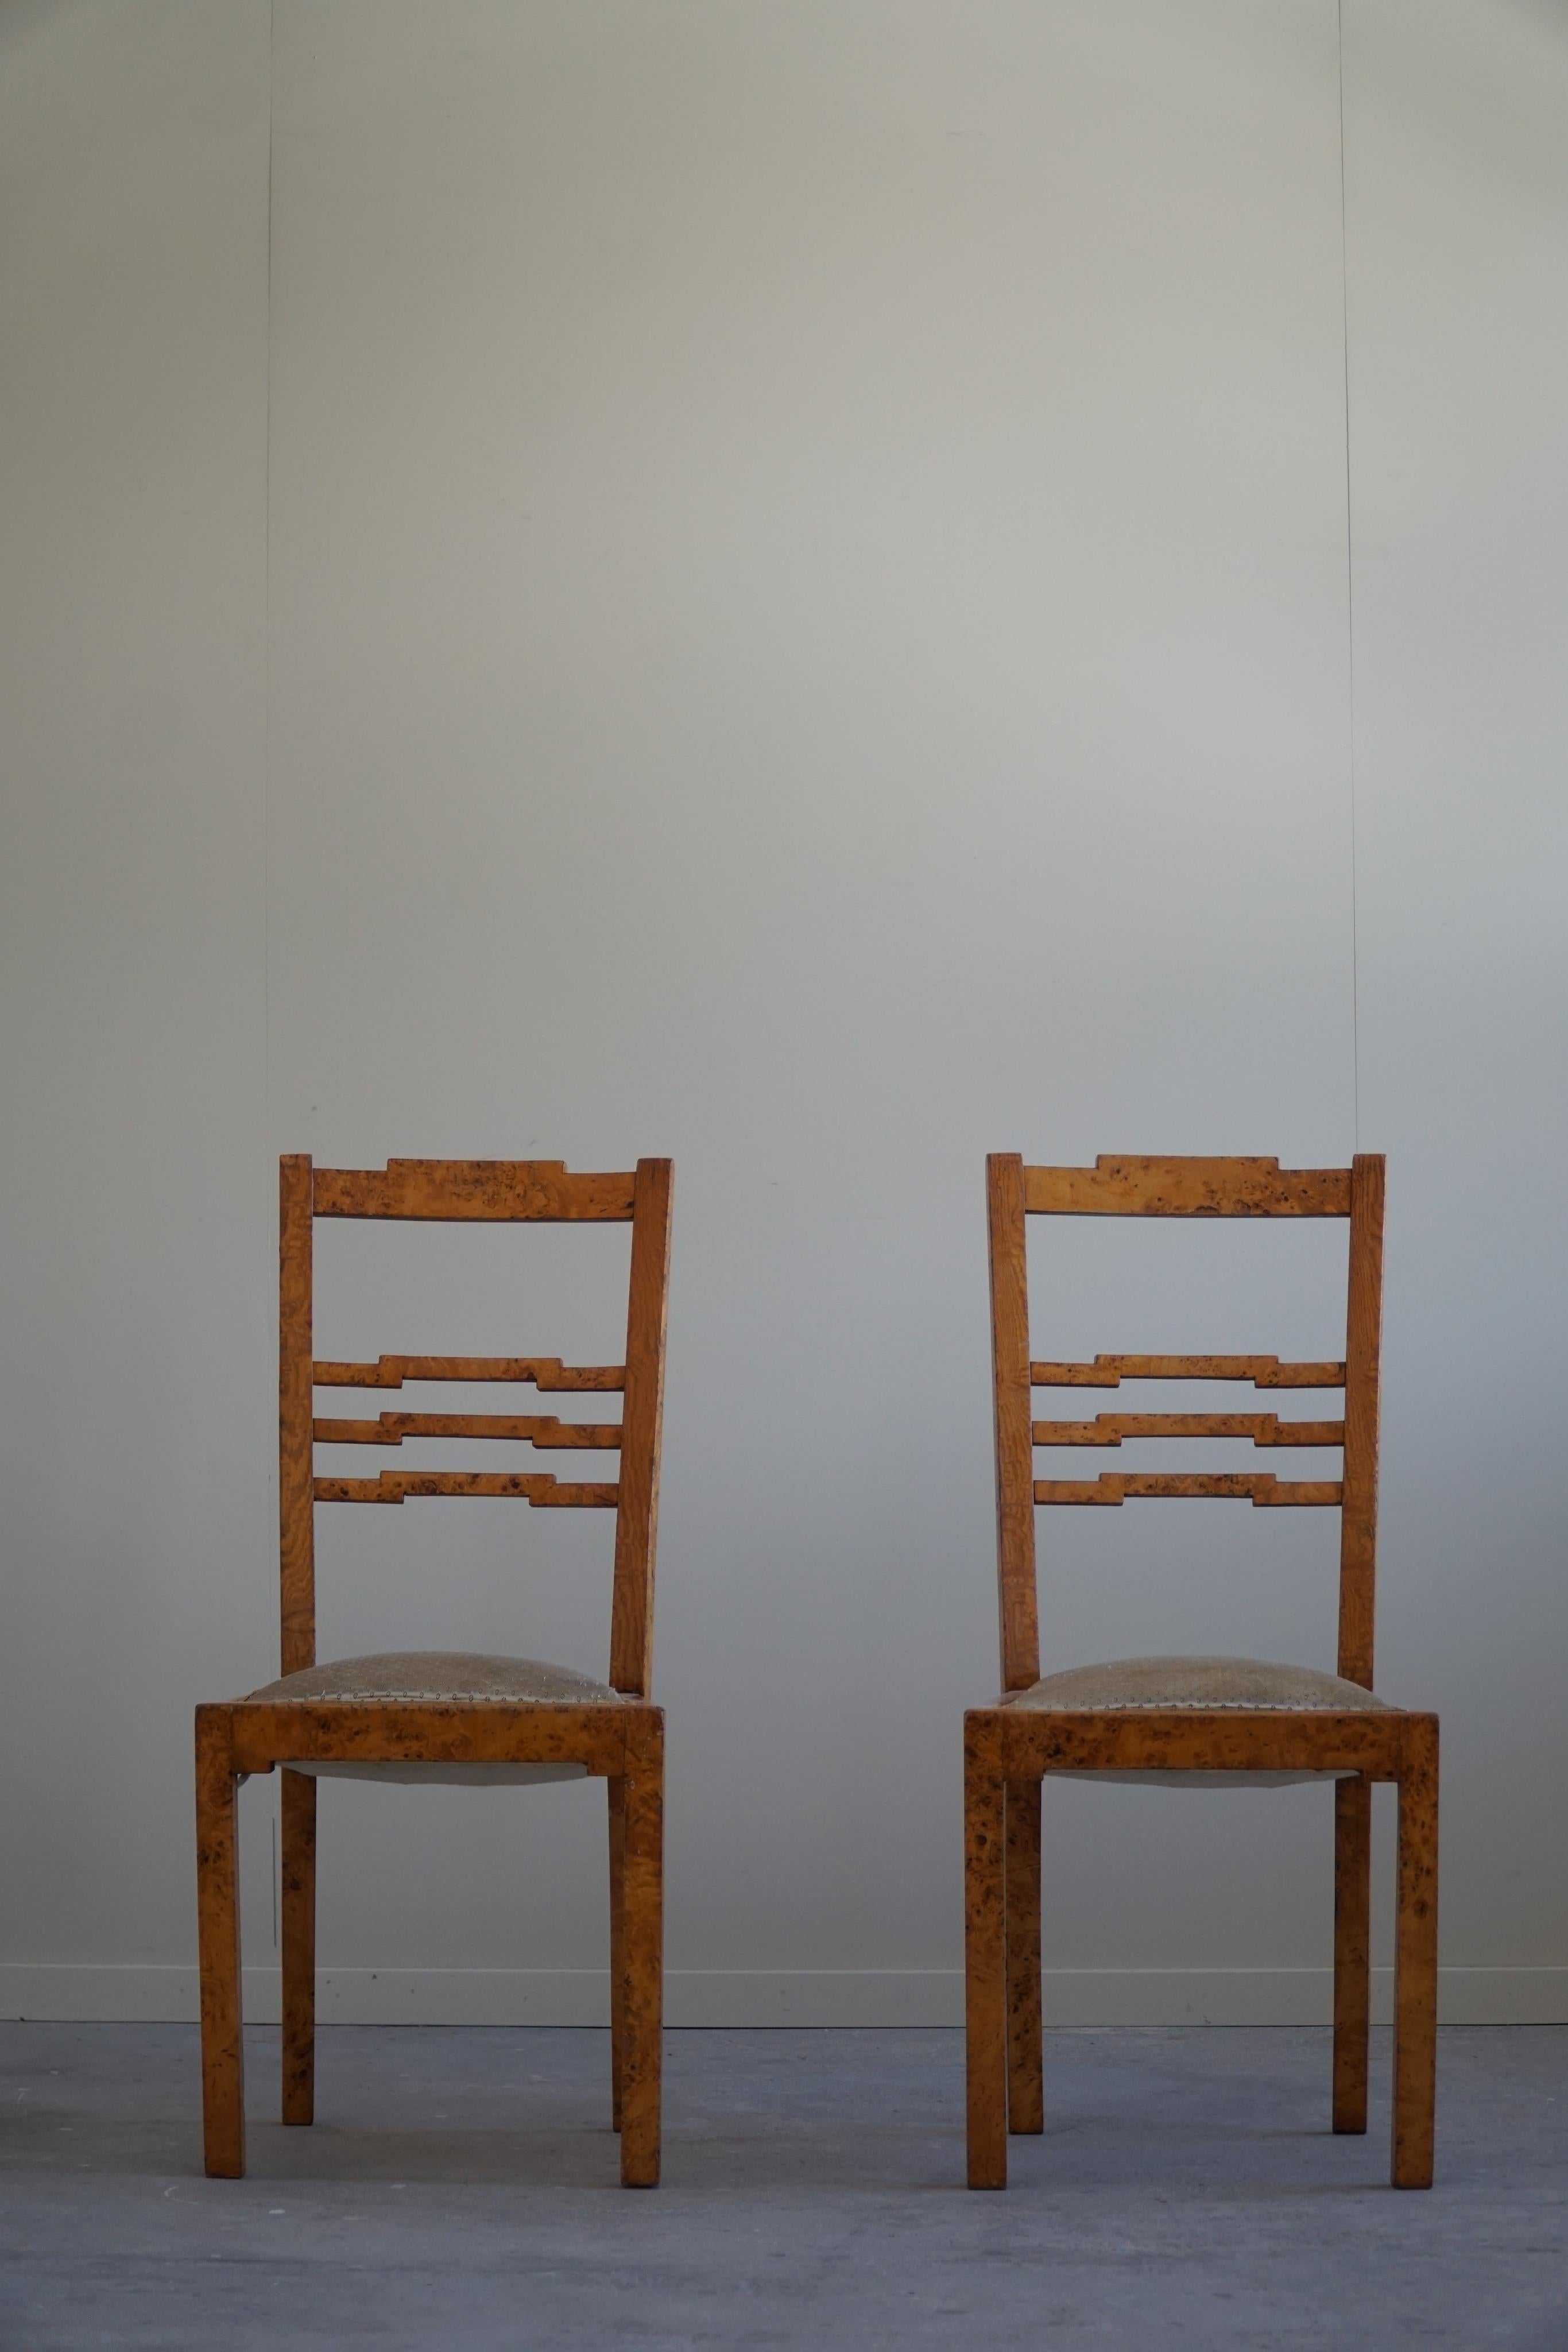 A Pair of Swedish Art Deco Dining Room Chairs in Birch, 1920s For Sale 13